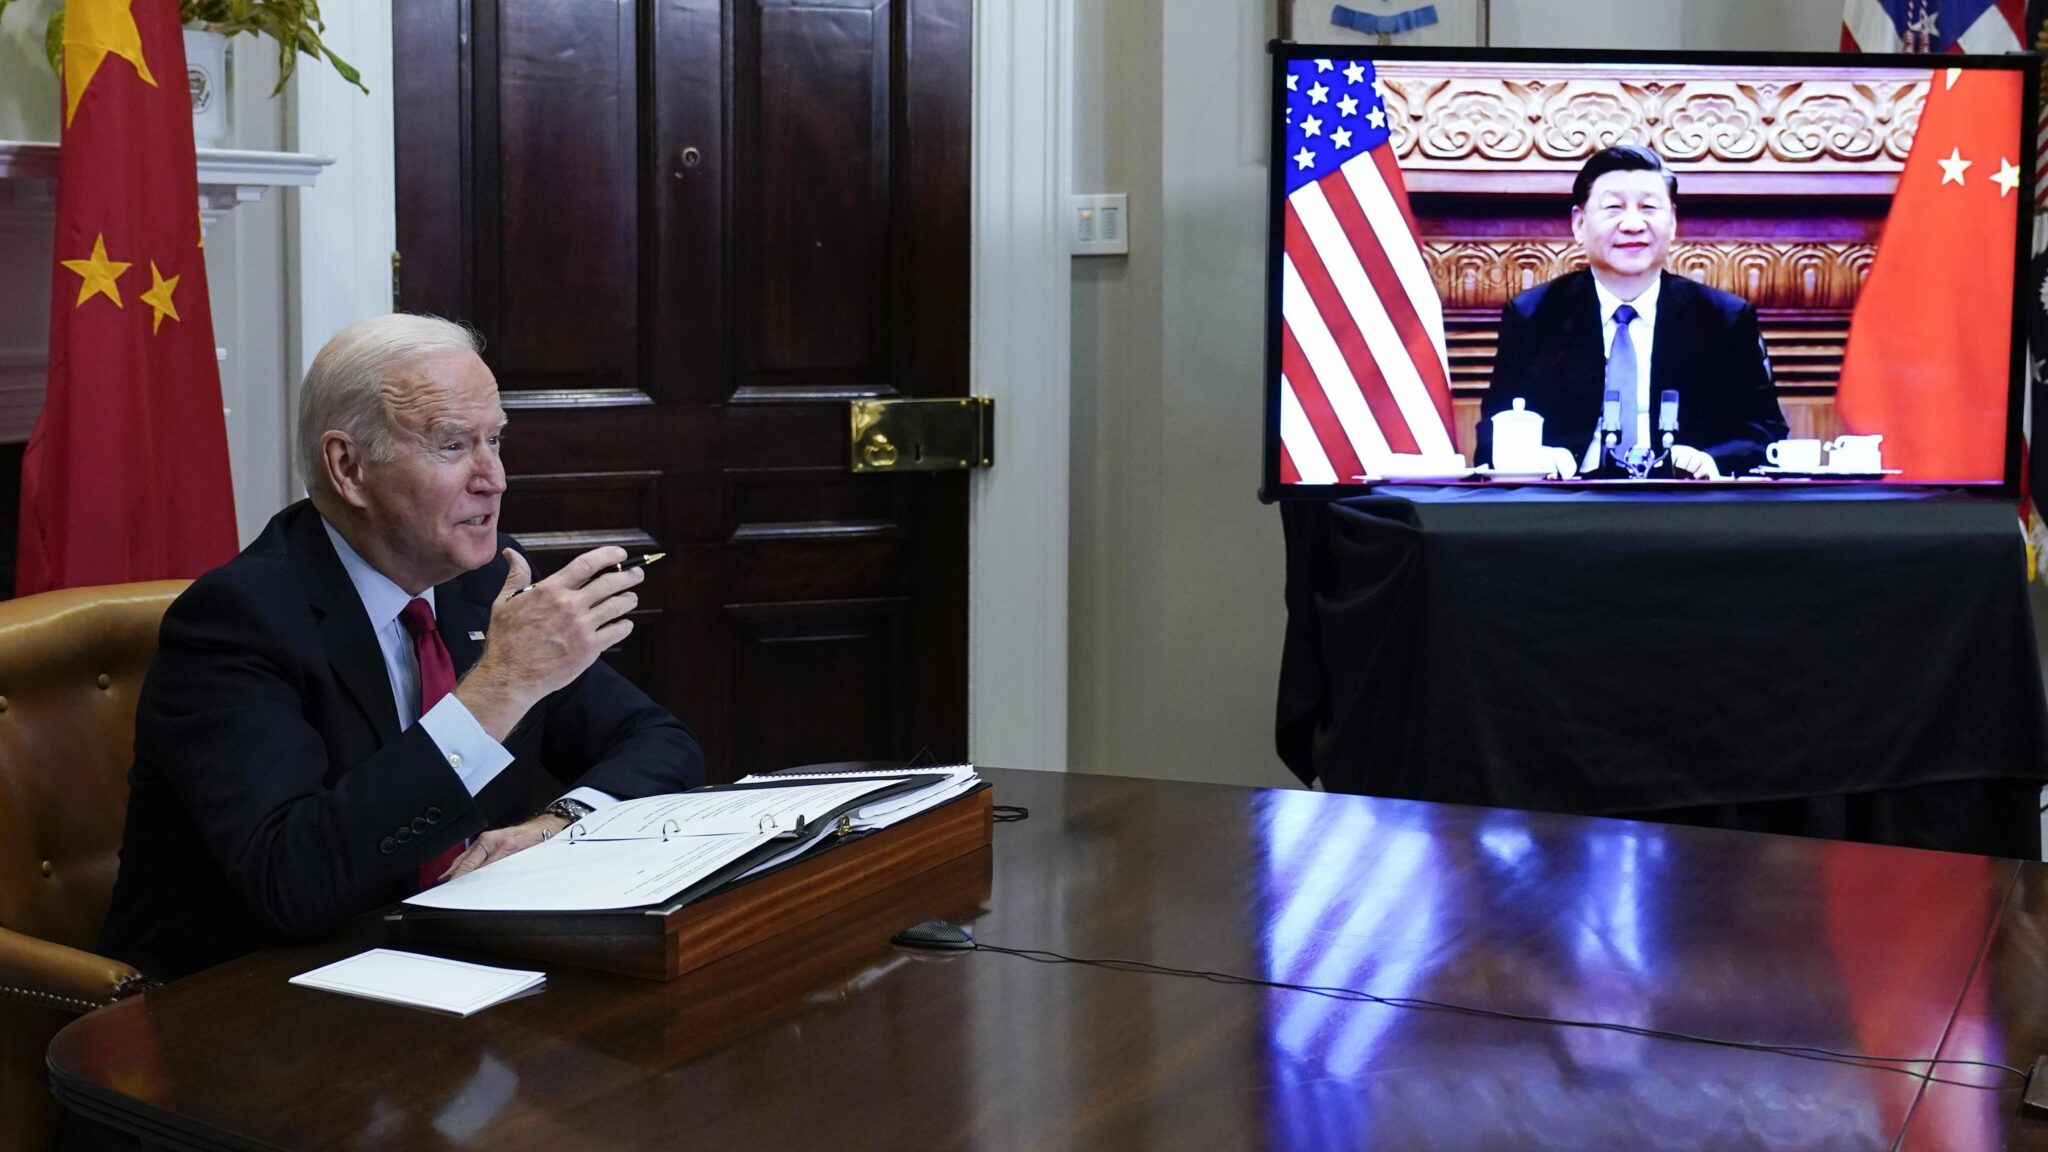 President Joe Biden meeting with Chinese President Xi Jinping virtually from the Roosevelt Room of the White House in Washington, Monday, Nov. 15, 2021. Photo: AP/Susan Walsh